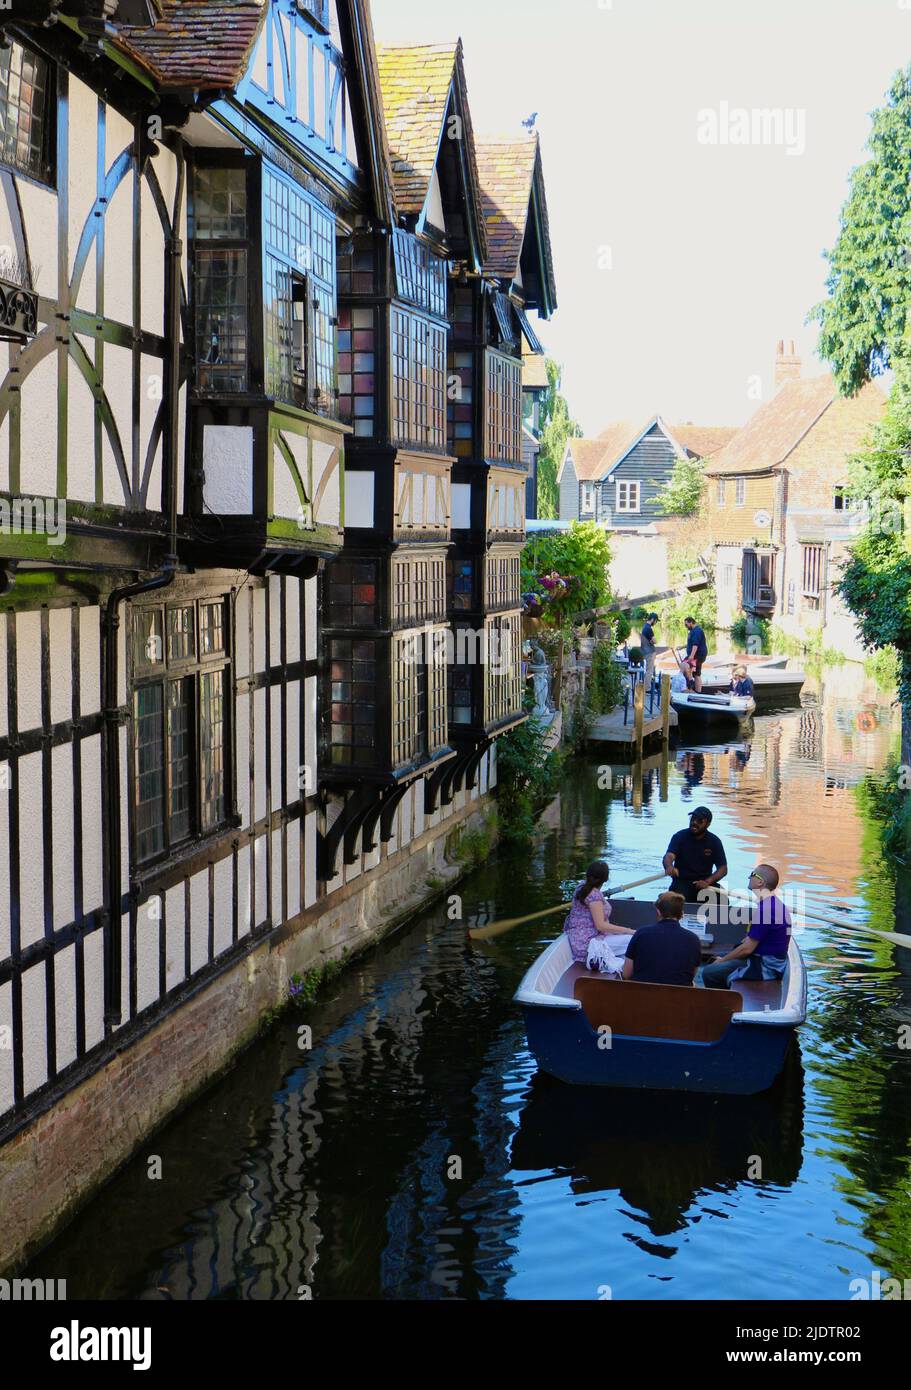 The Old Weavers' House A.D. 1500 restaurant on the River Stour Canterbury Kent England UK Stock Photo